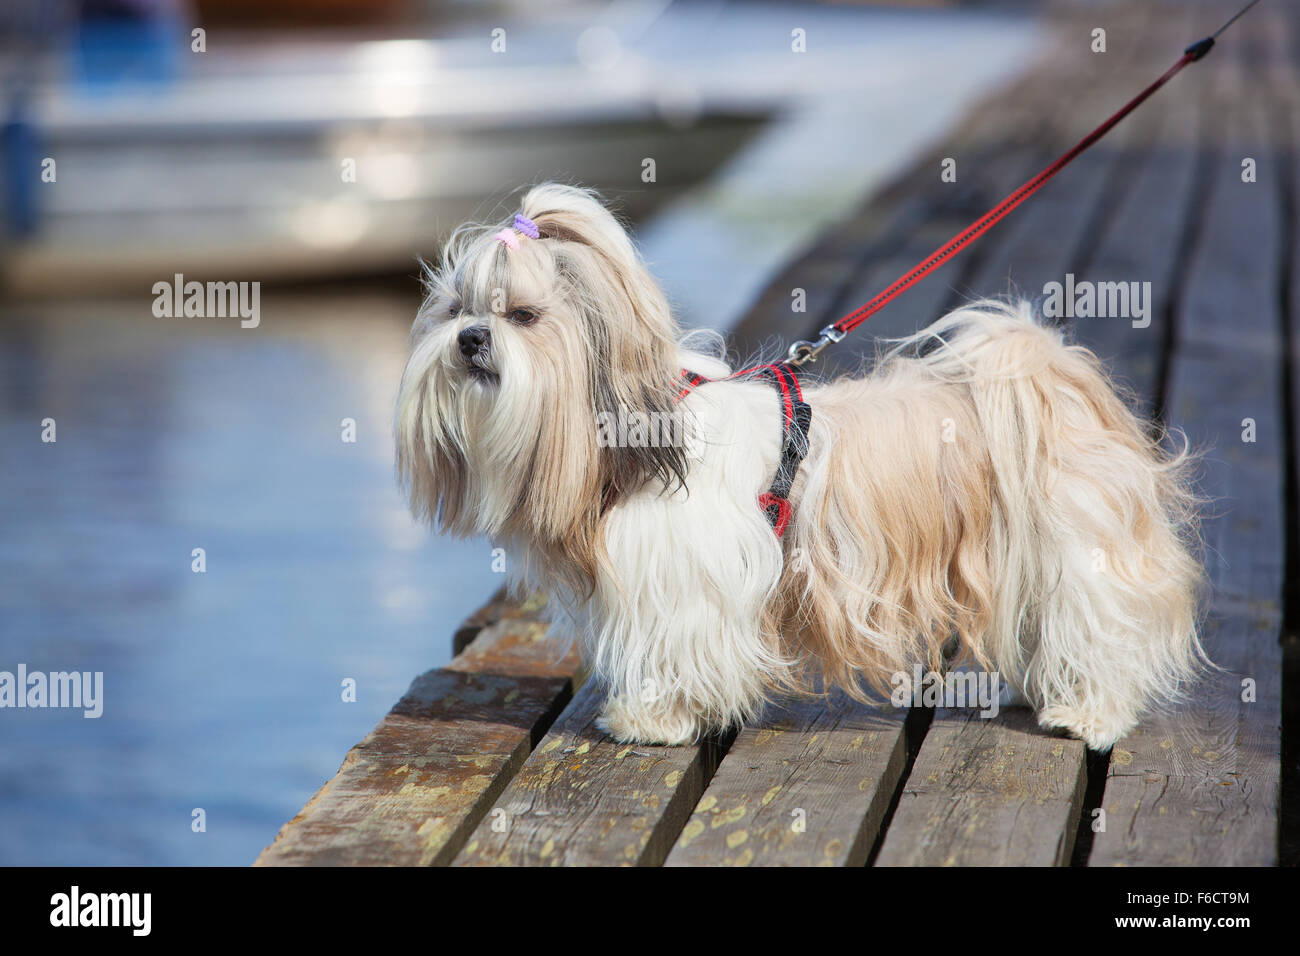 Shih-tzu dog standing on wooden bridge and looking on water. Stock Photo